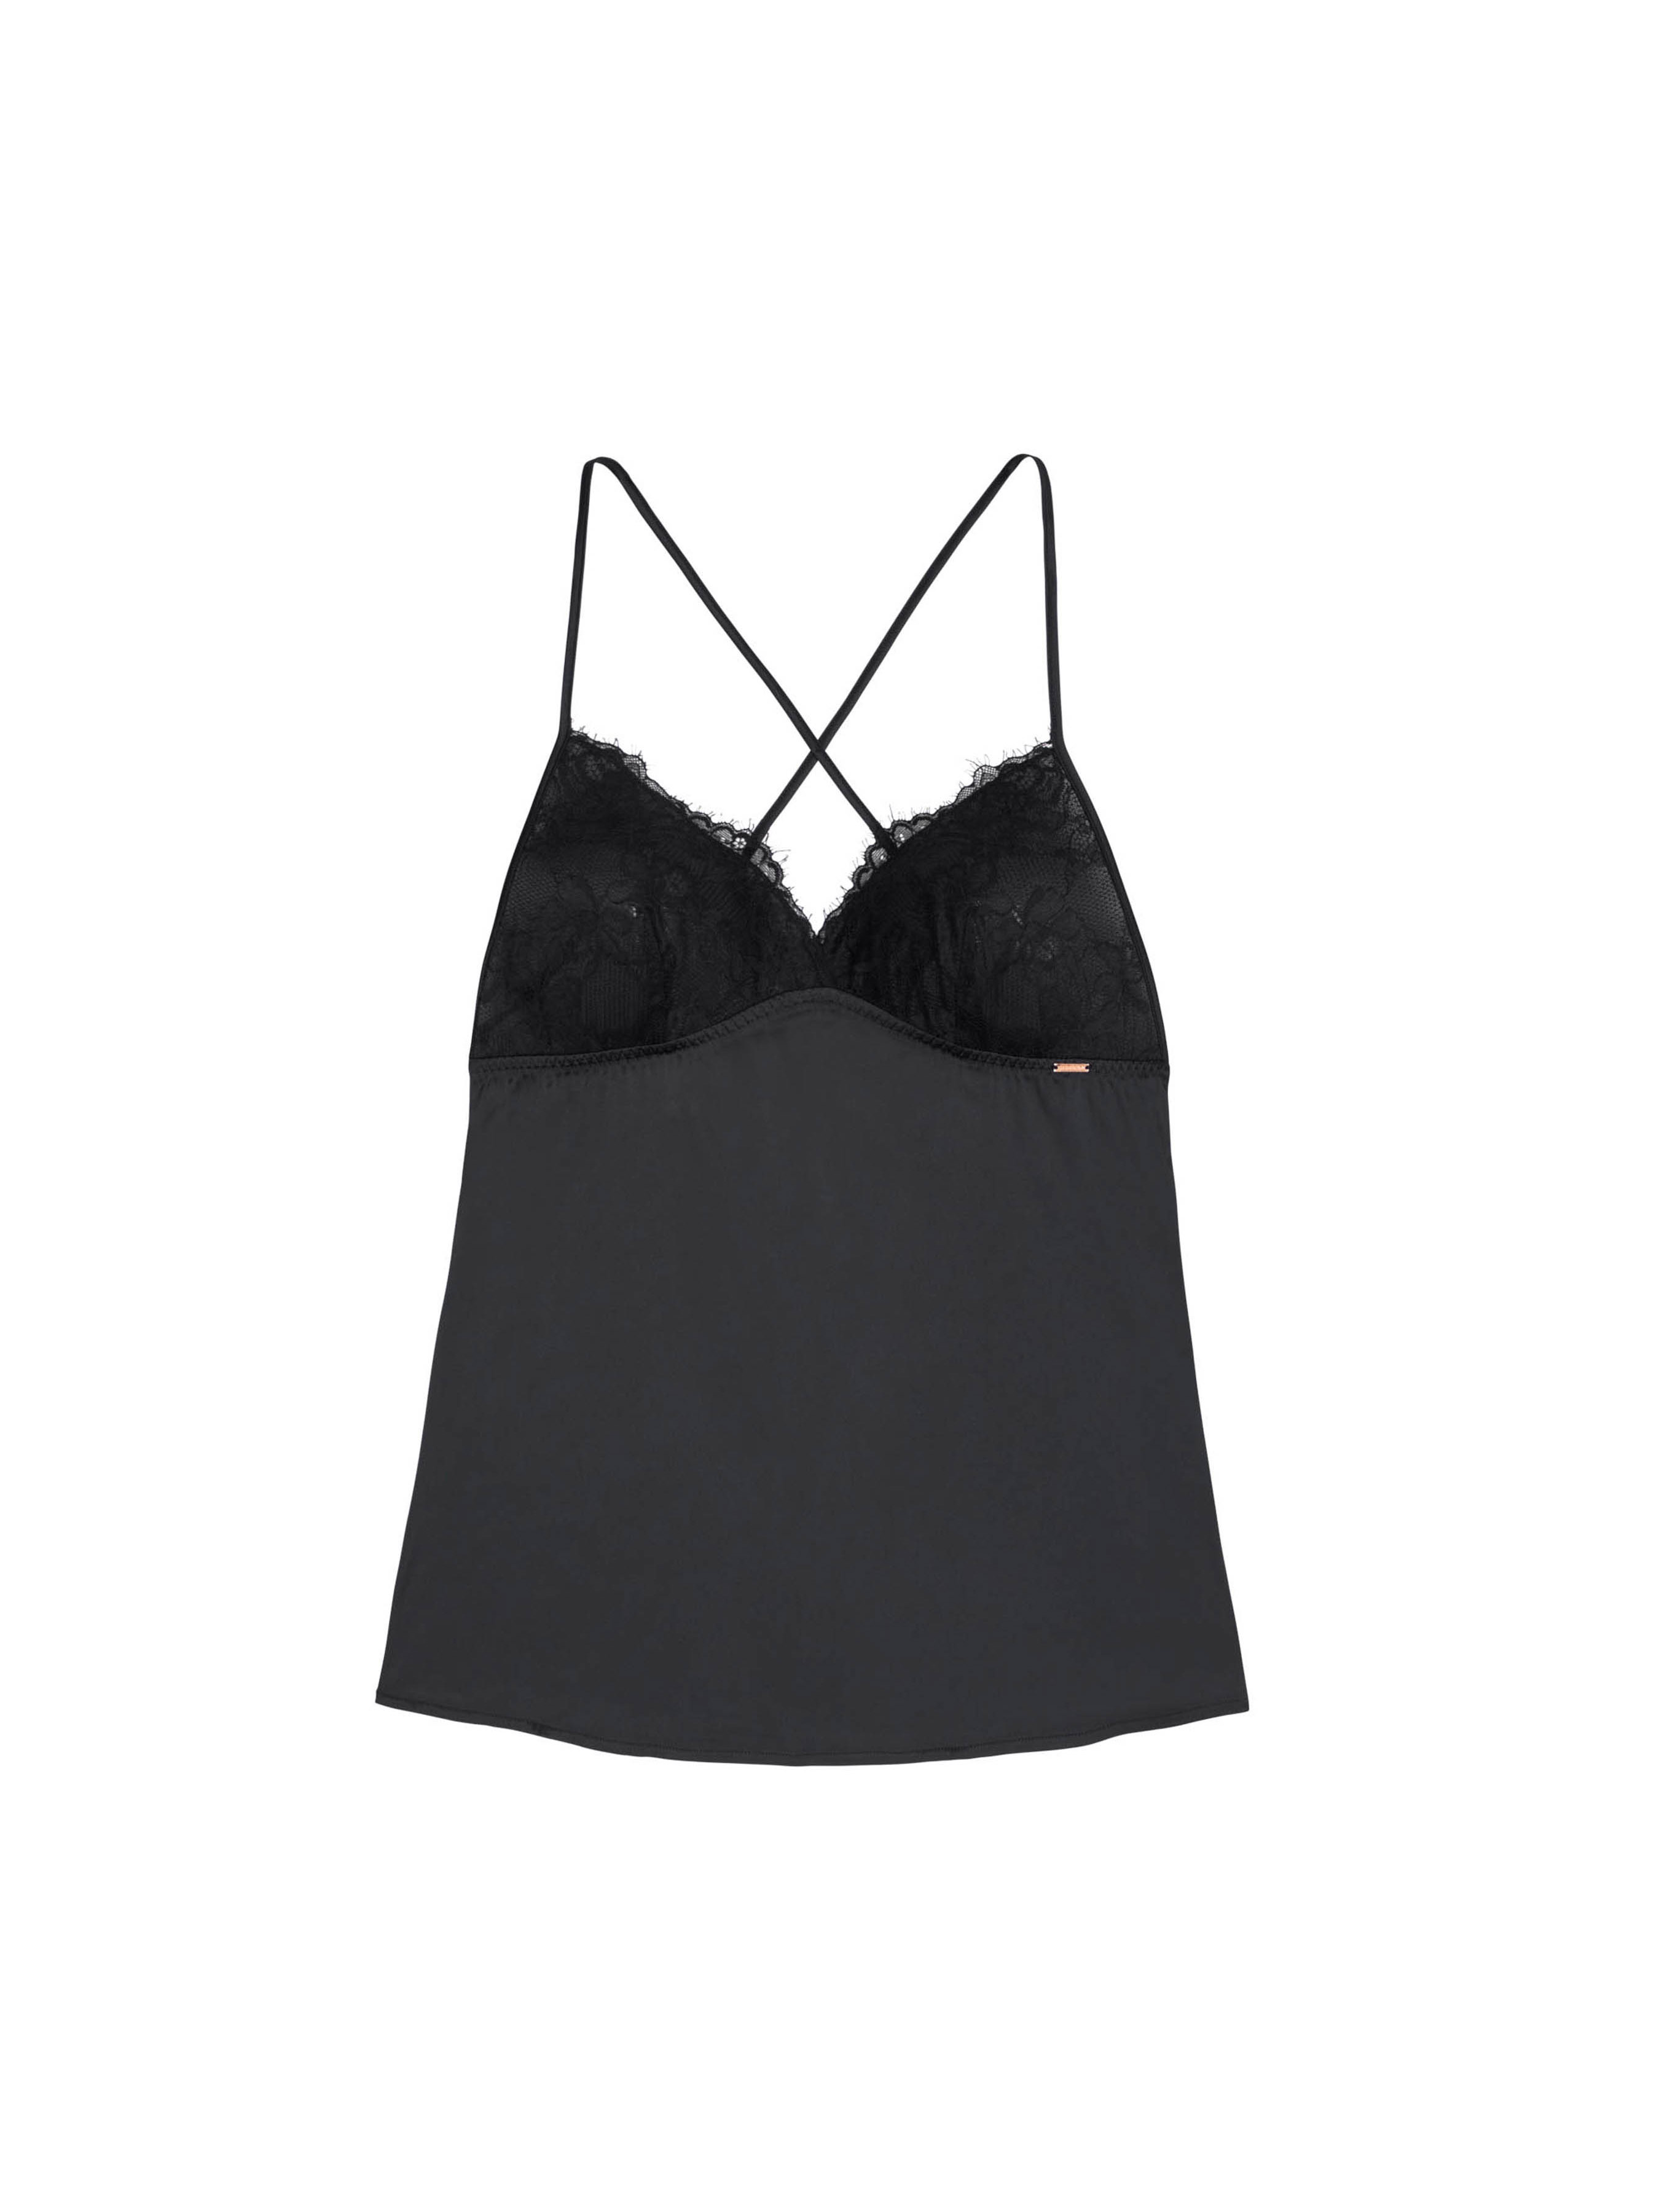 Solid Black Mesh Laced Arm Stretch Cami Crop Top – Fikafuntimes Clothing  Brand & Accessories